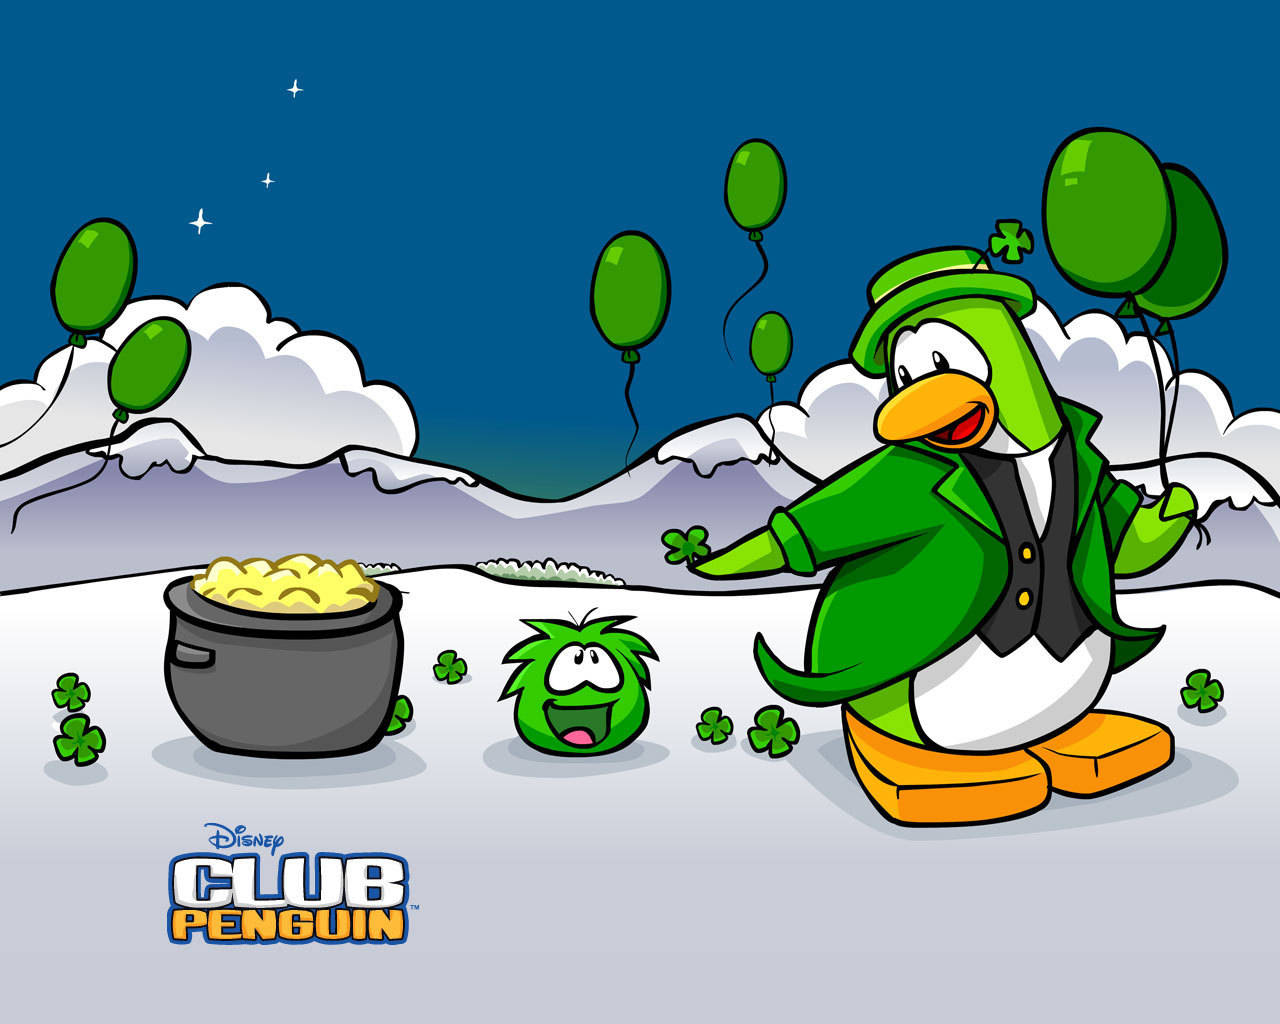 Club Penguin Poster With Green Balloons